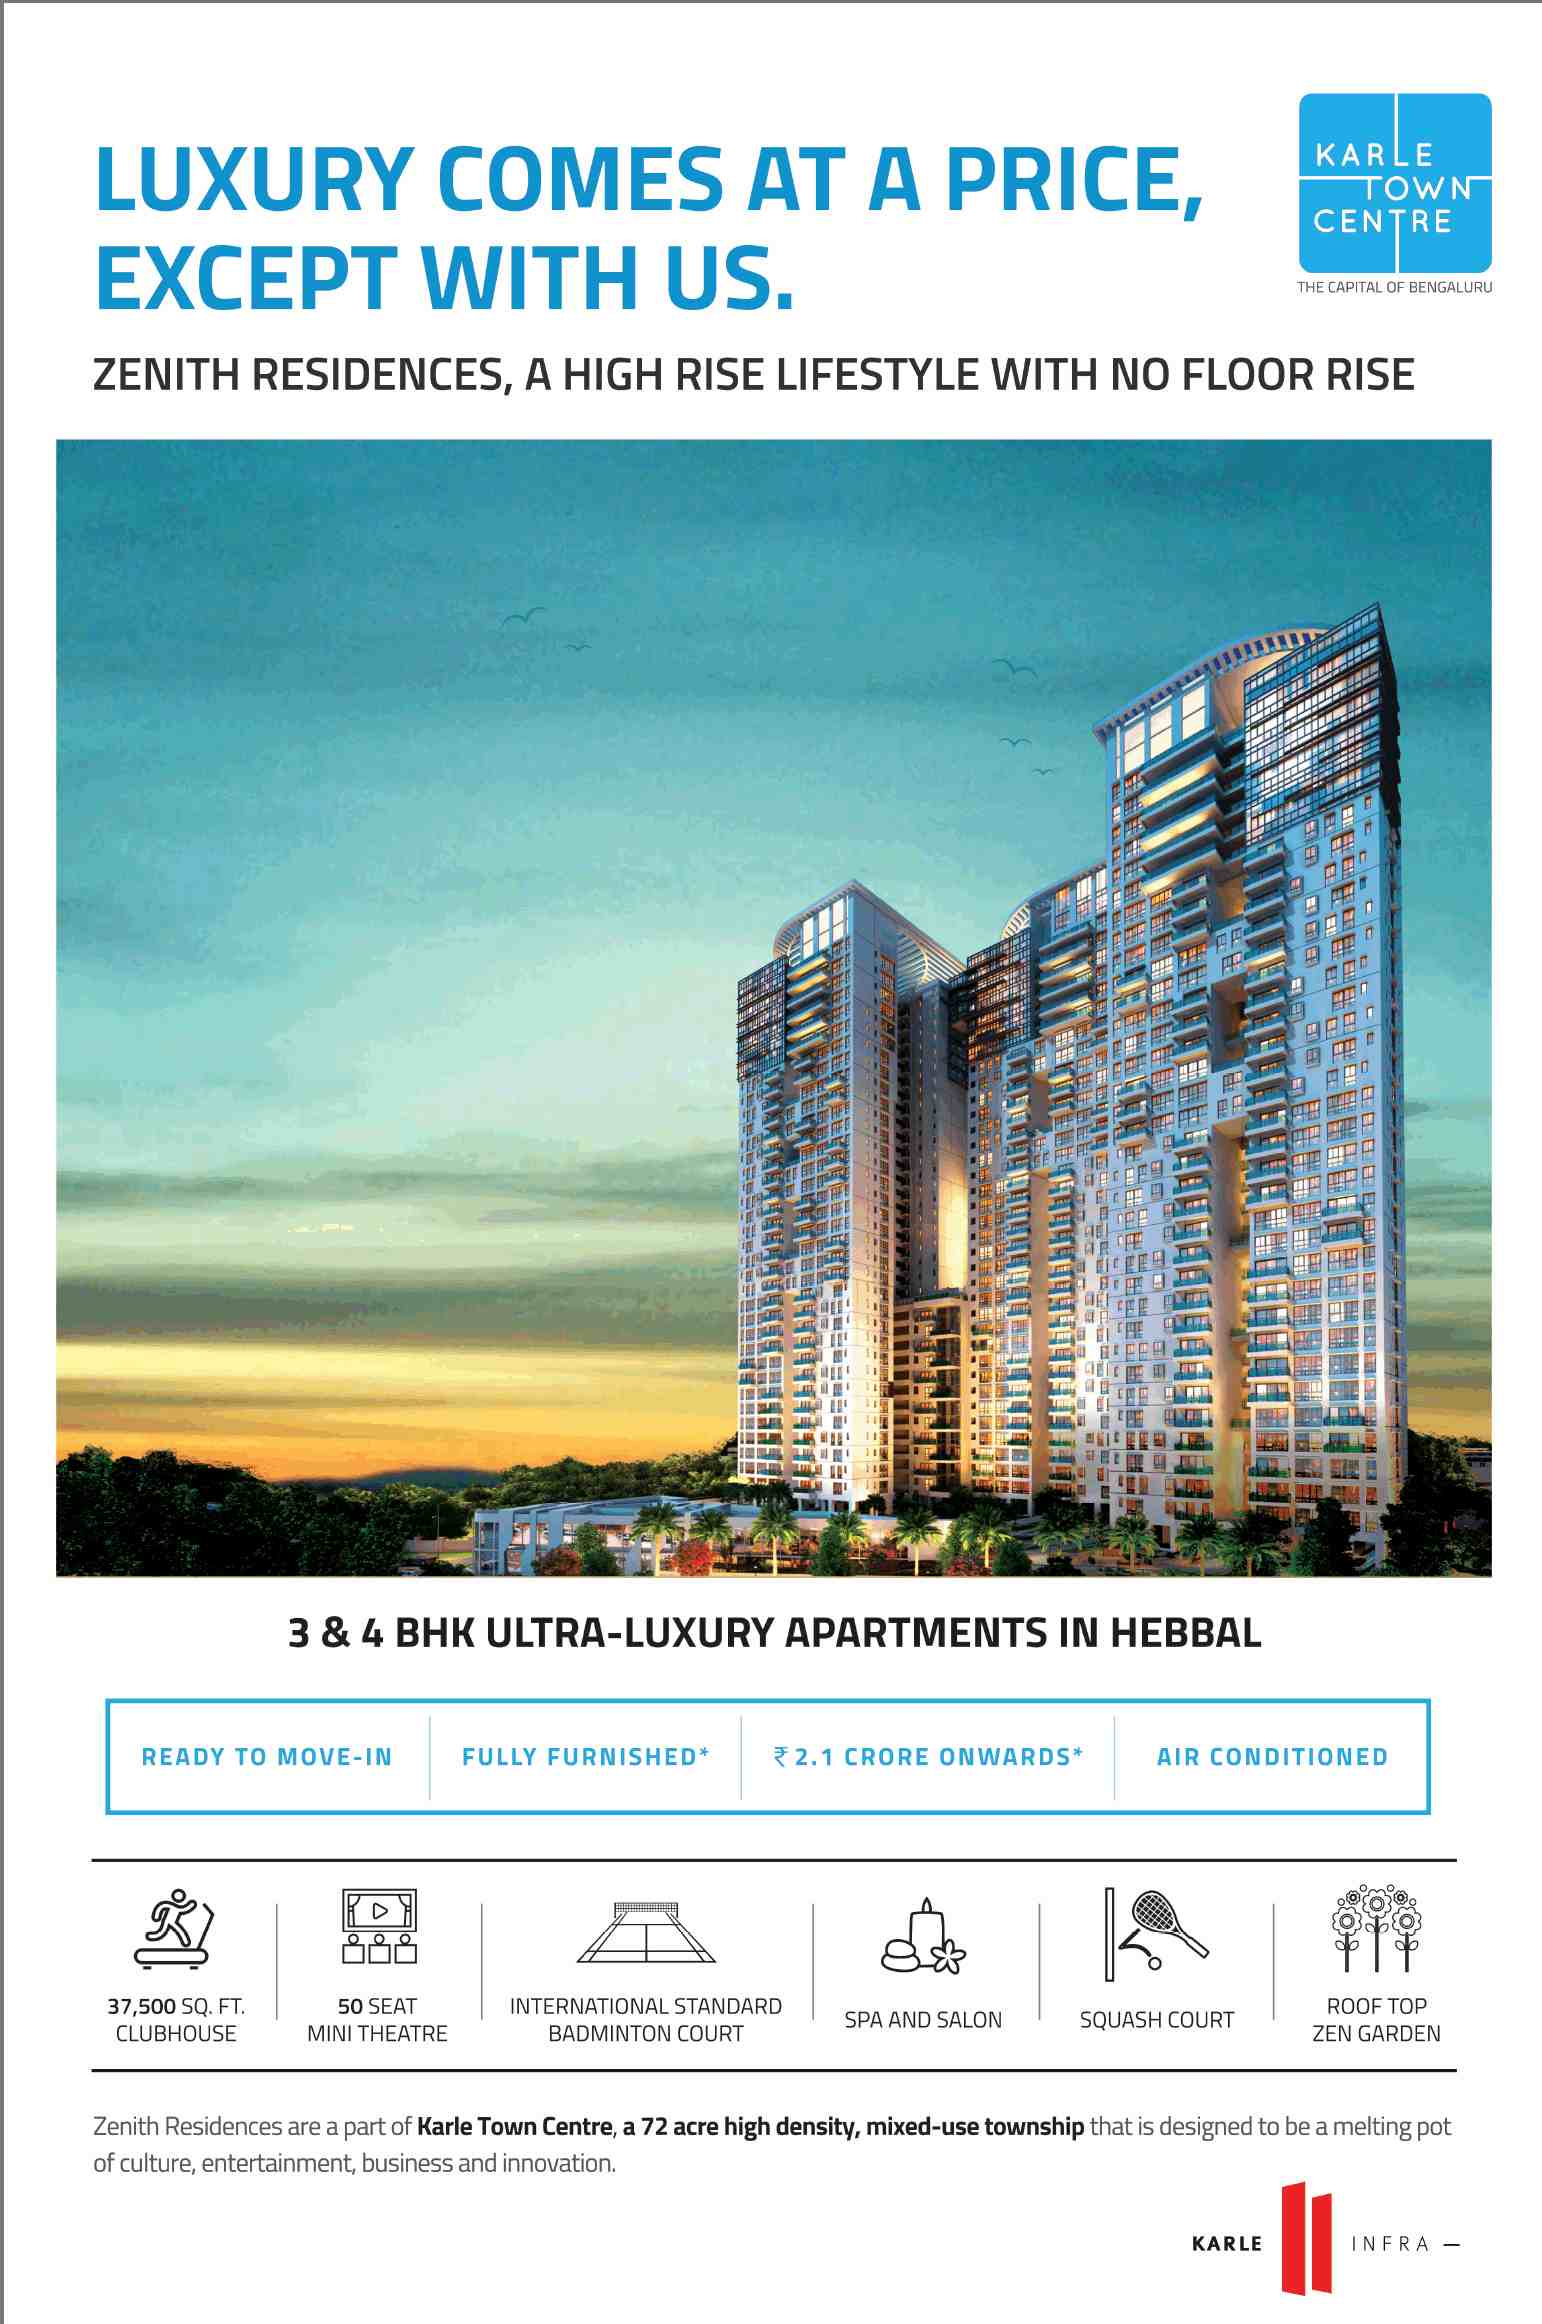 Live a high rise lifestyle with no floor rise at Karle Town Centre in Bangalore Update